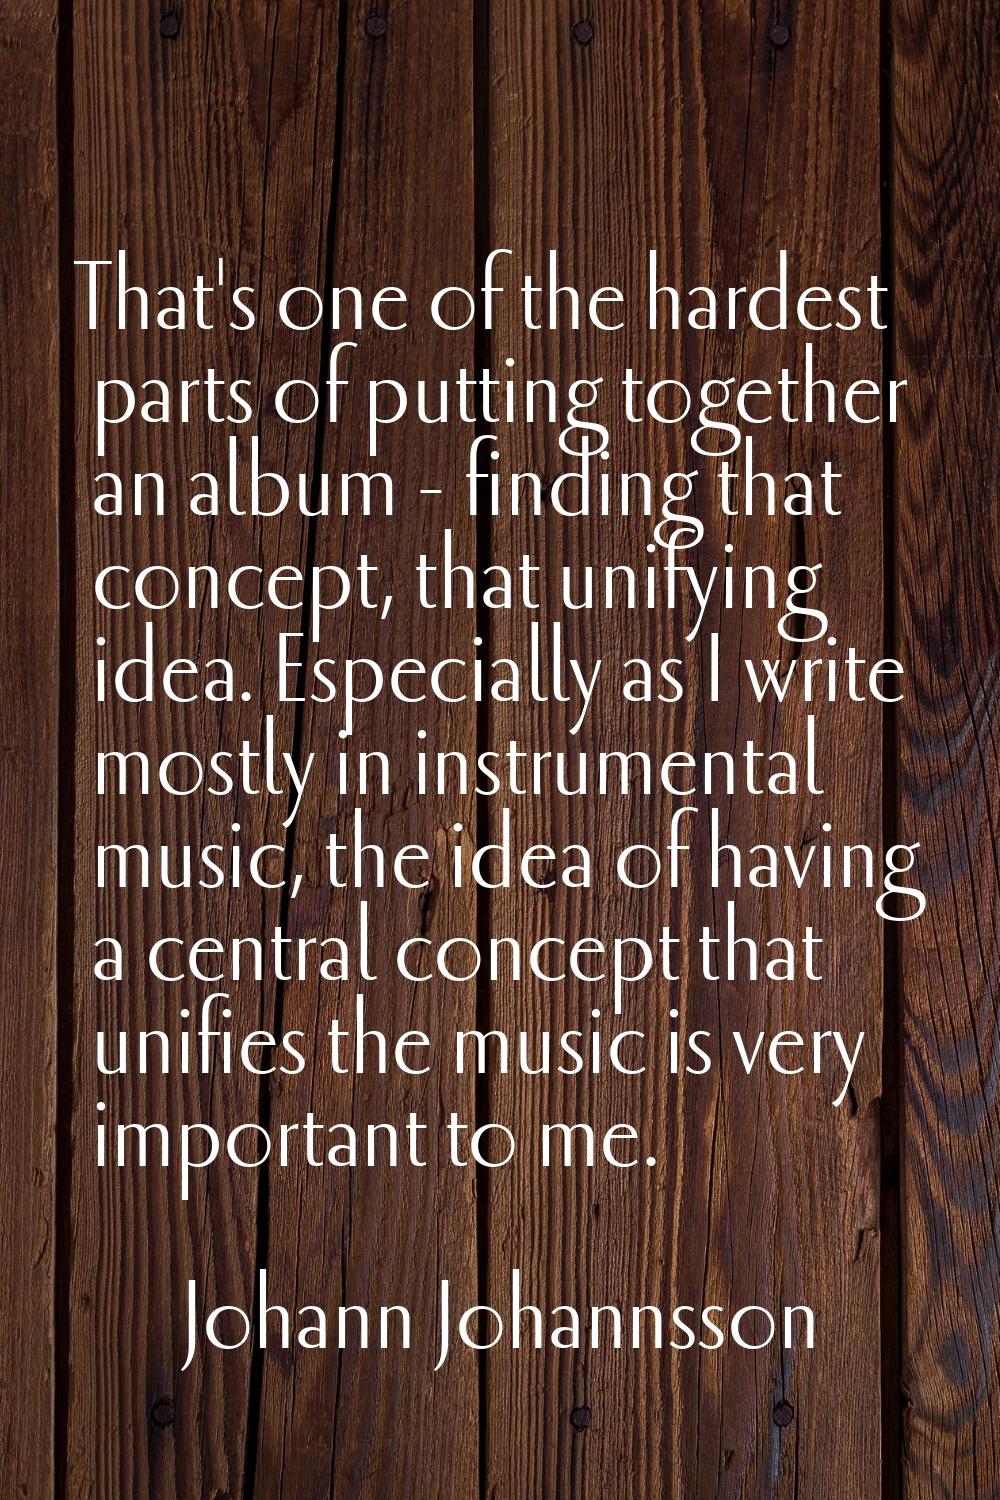 That's one of the hardest parts of putting together an album - finding that concept, that unifying 